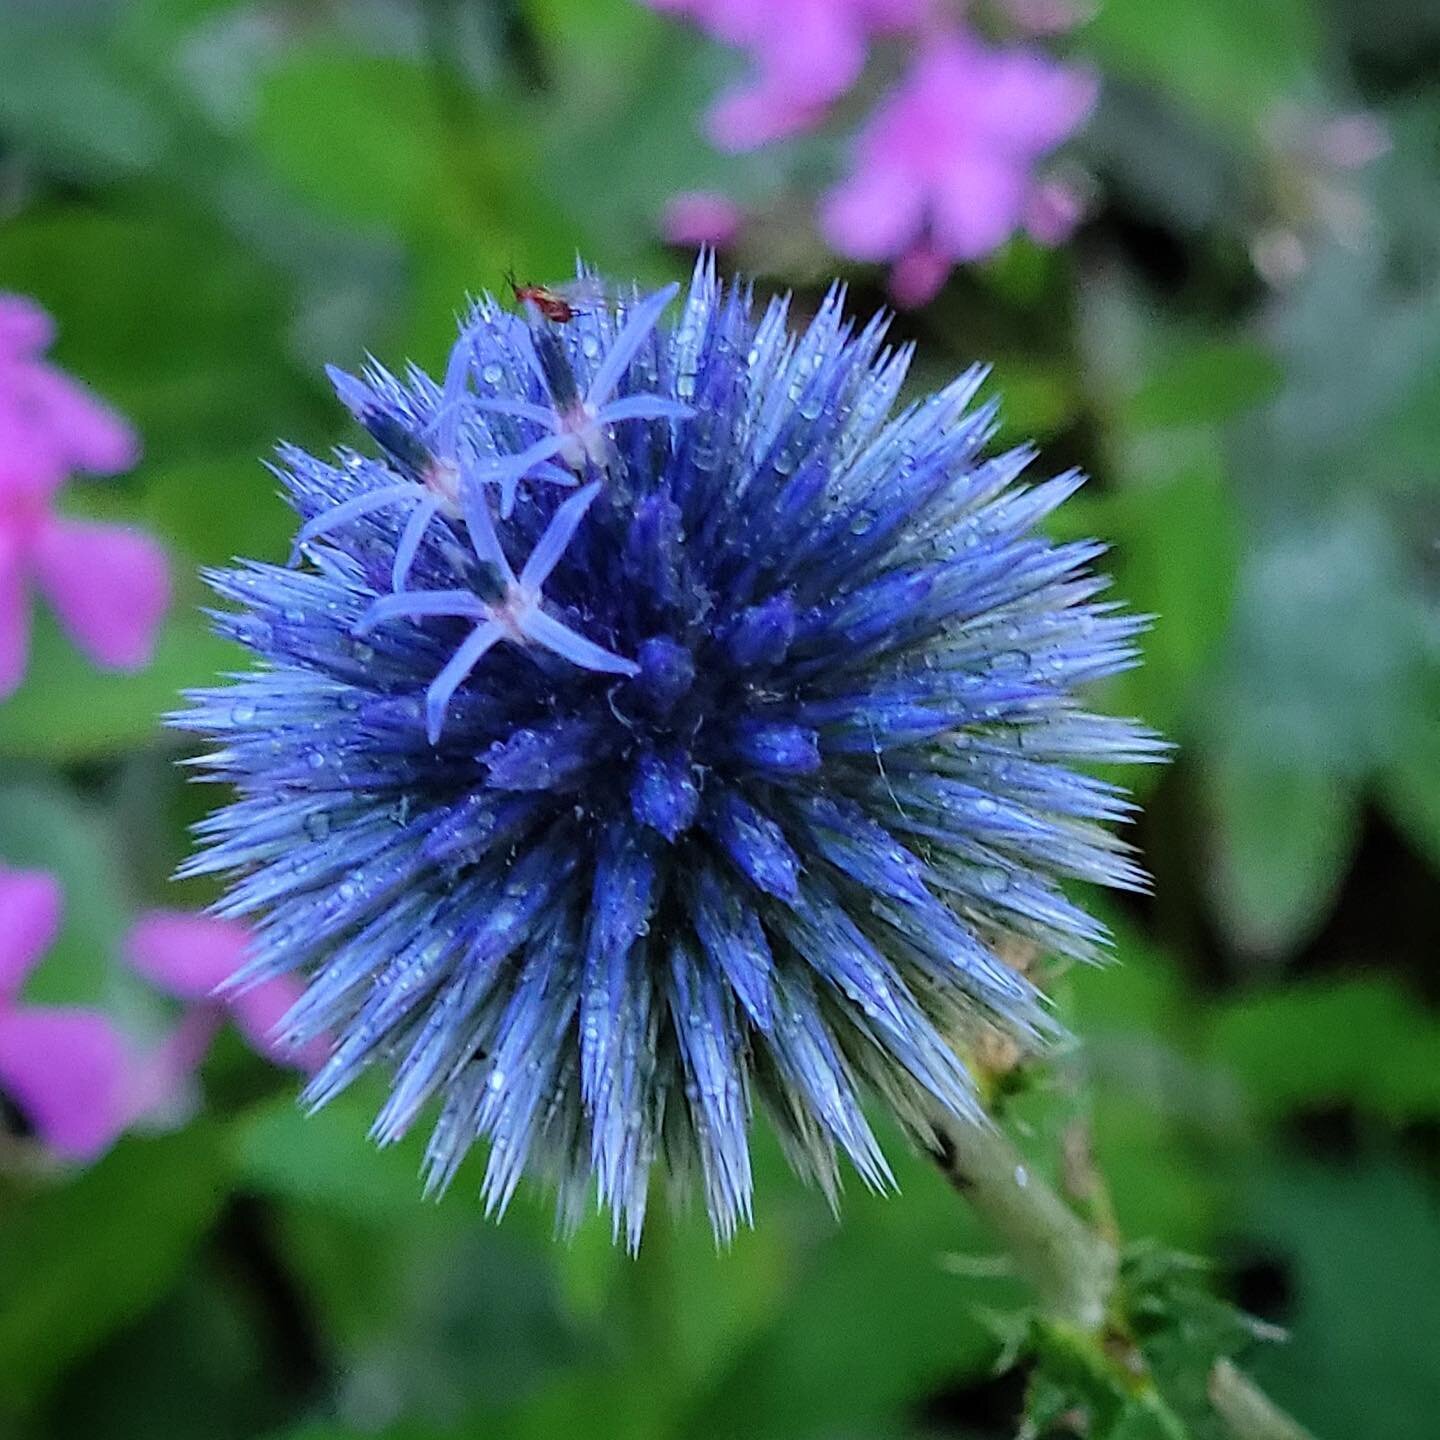 Our &lsquo;Blue Glow&rsquo; Echinops just keeps getting darker! The most beautiful blue and it&rsquo;s starting to bloom. 💙💙💙